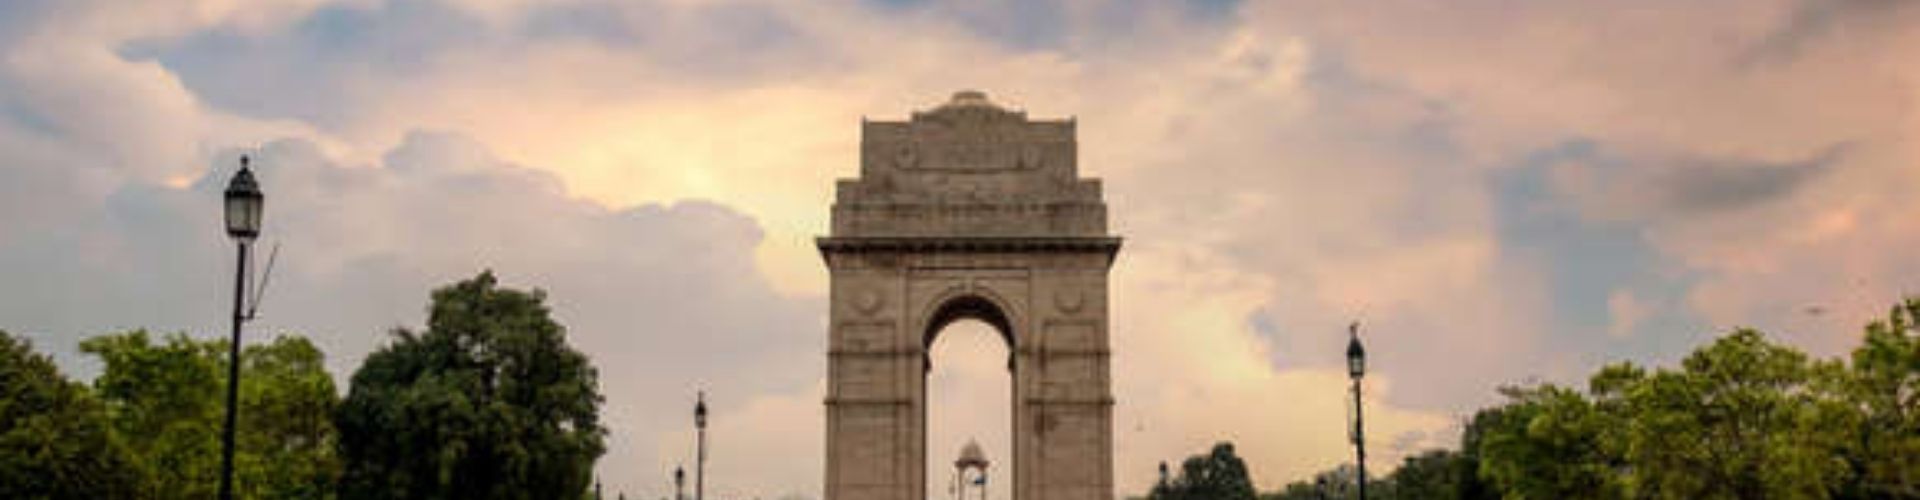 Delhi Tour Package with Agra